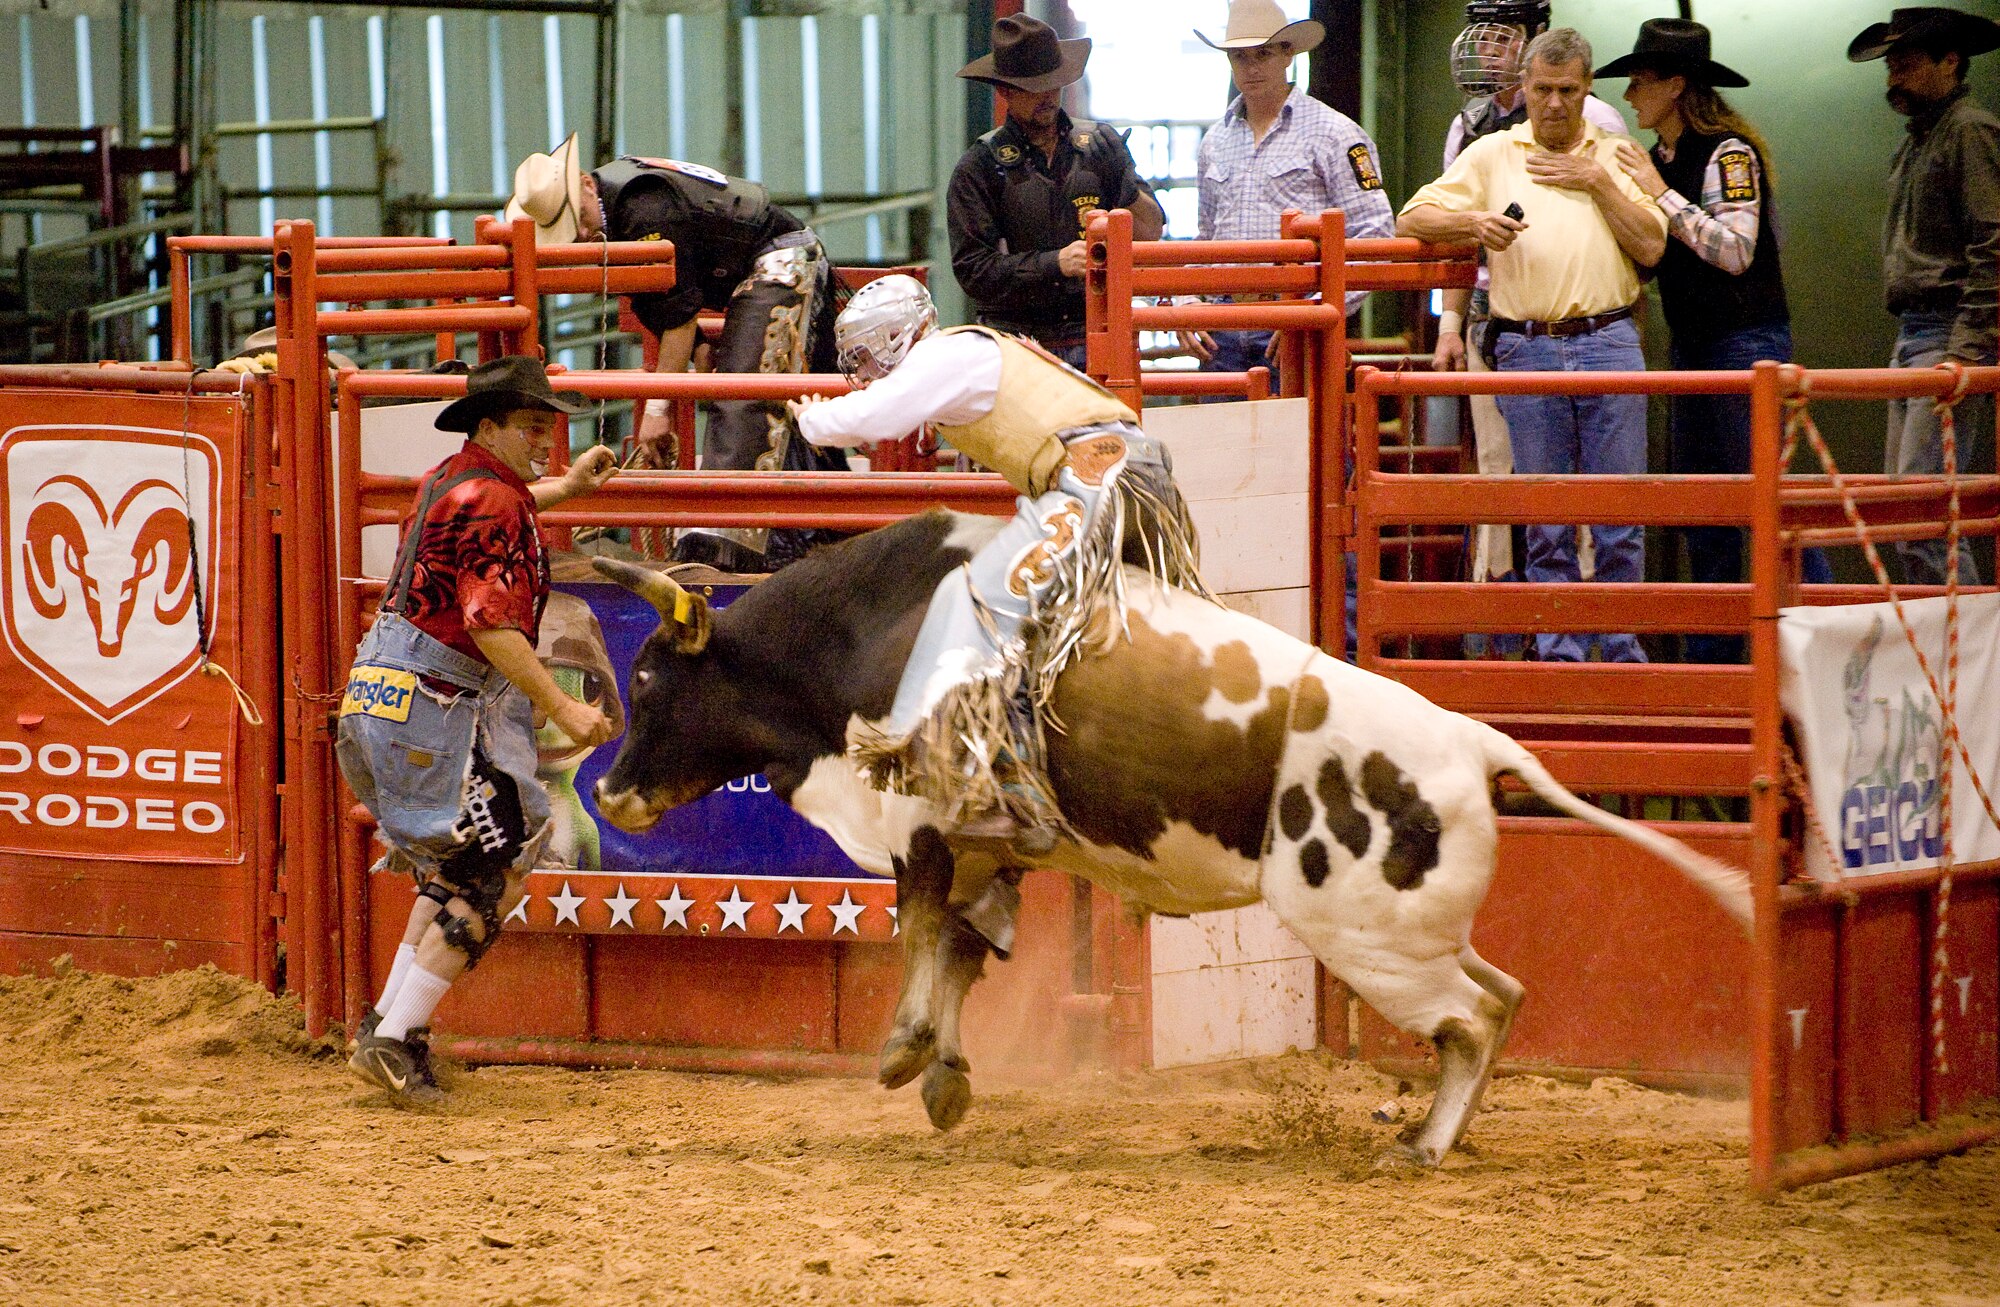 Staff Sgt. R.J. Eppers leaves the chute during the bull riding competition at the Professional Armed Forces Rodeo Associations World Finals Nov. 20, 2010, in Glen Rose, Texas. PAFRA is a professional rodeo organization founded and comprised of military members, retirees, dependents, veterans and civilian Department of Defense card holders. Sergeant Eppers is assigned to Ellsworth Air Force Base, S.D. (U.S. Air Force photo/Master Sgt. Jack Braden)